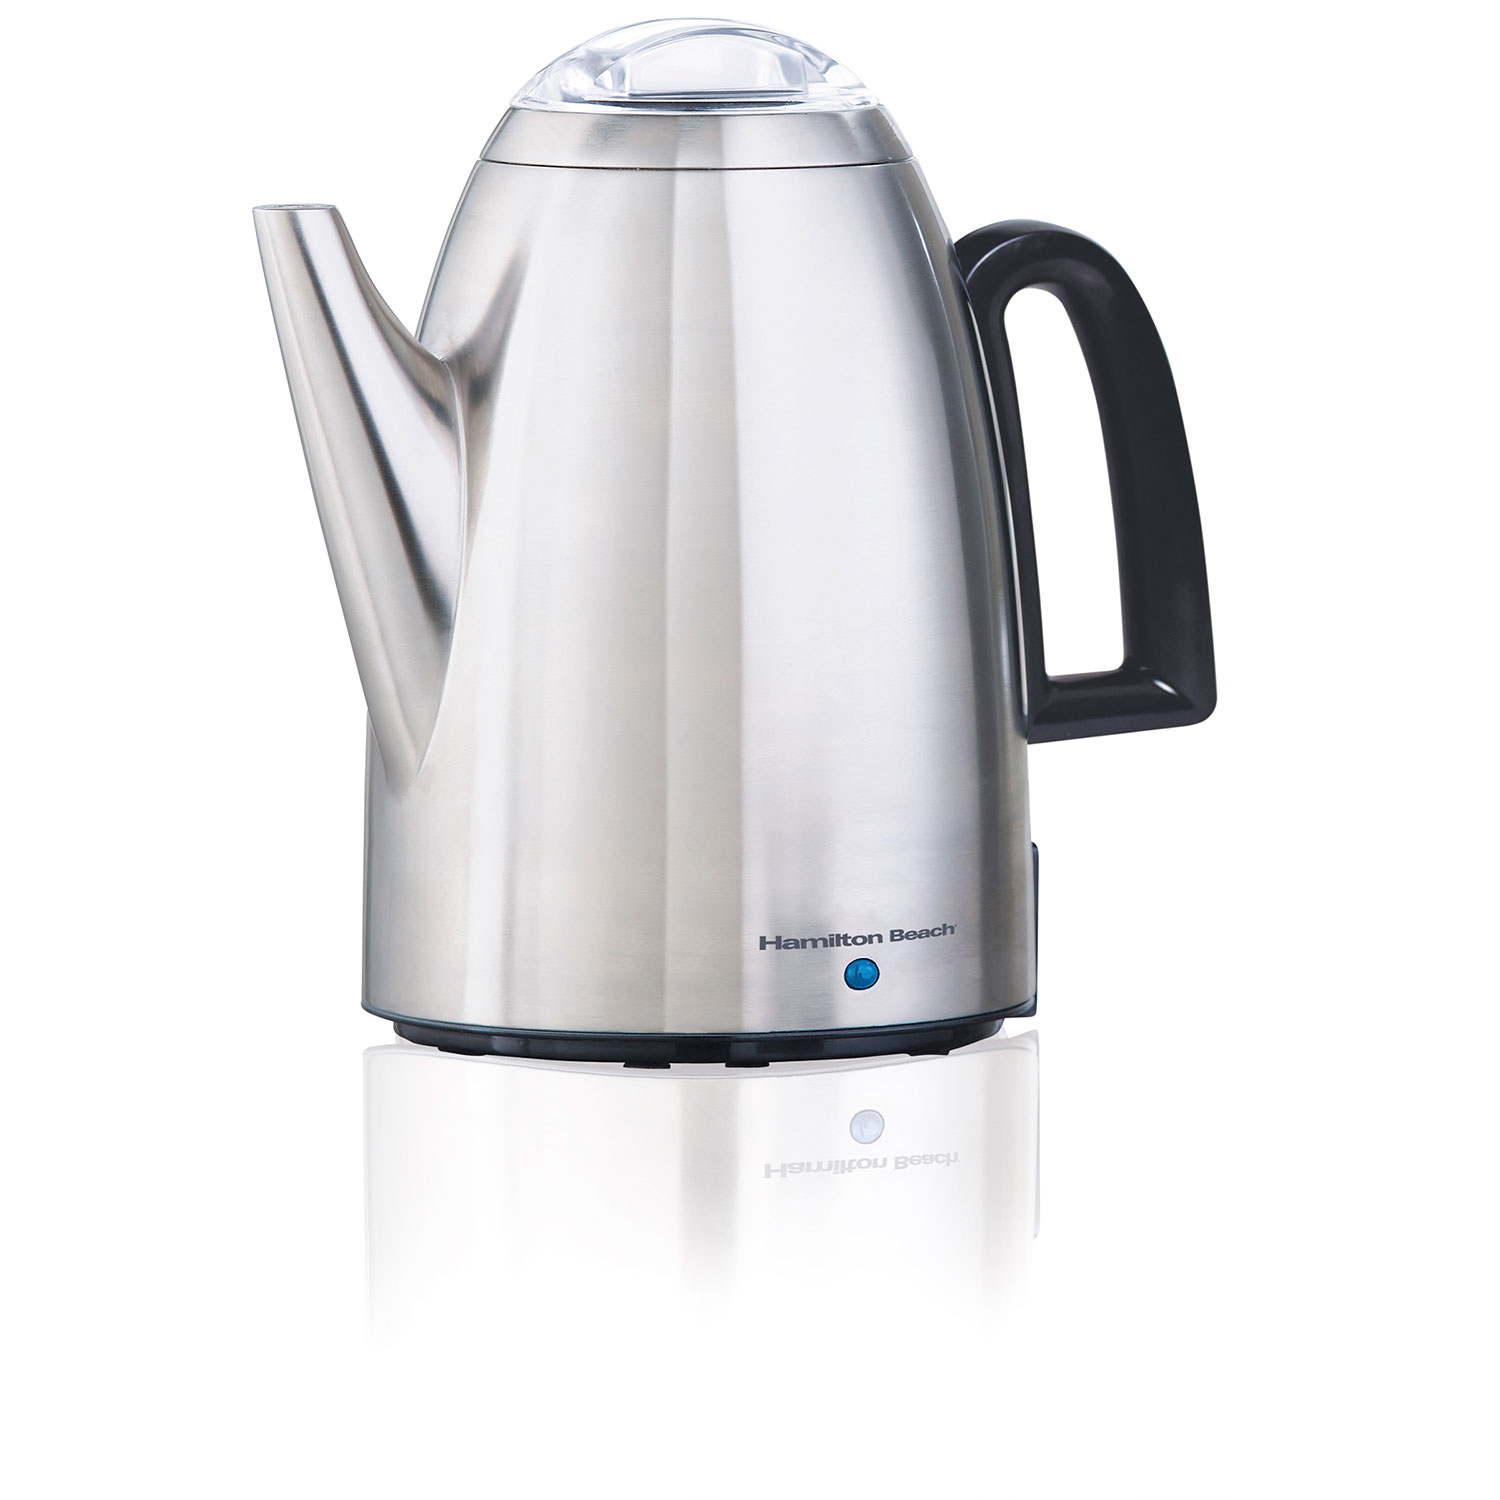 12 Cup Percolator Stainless Steel (40614R)